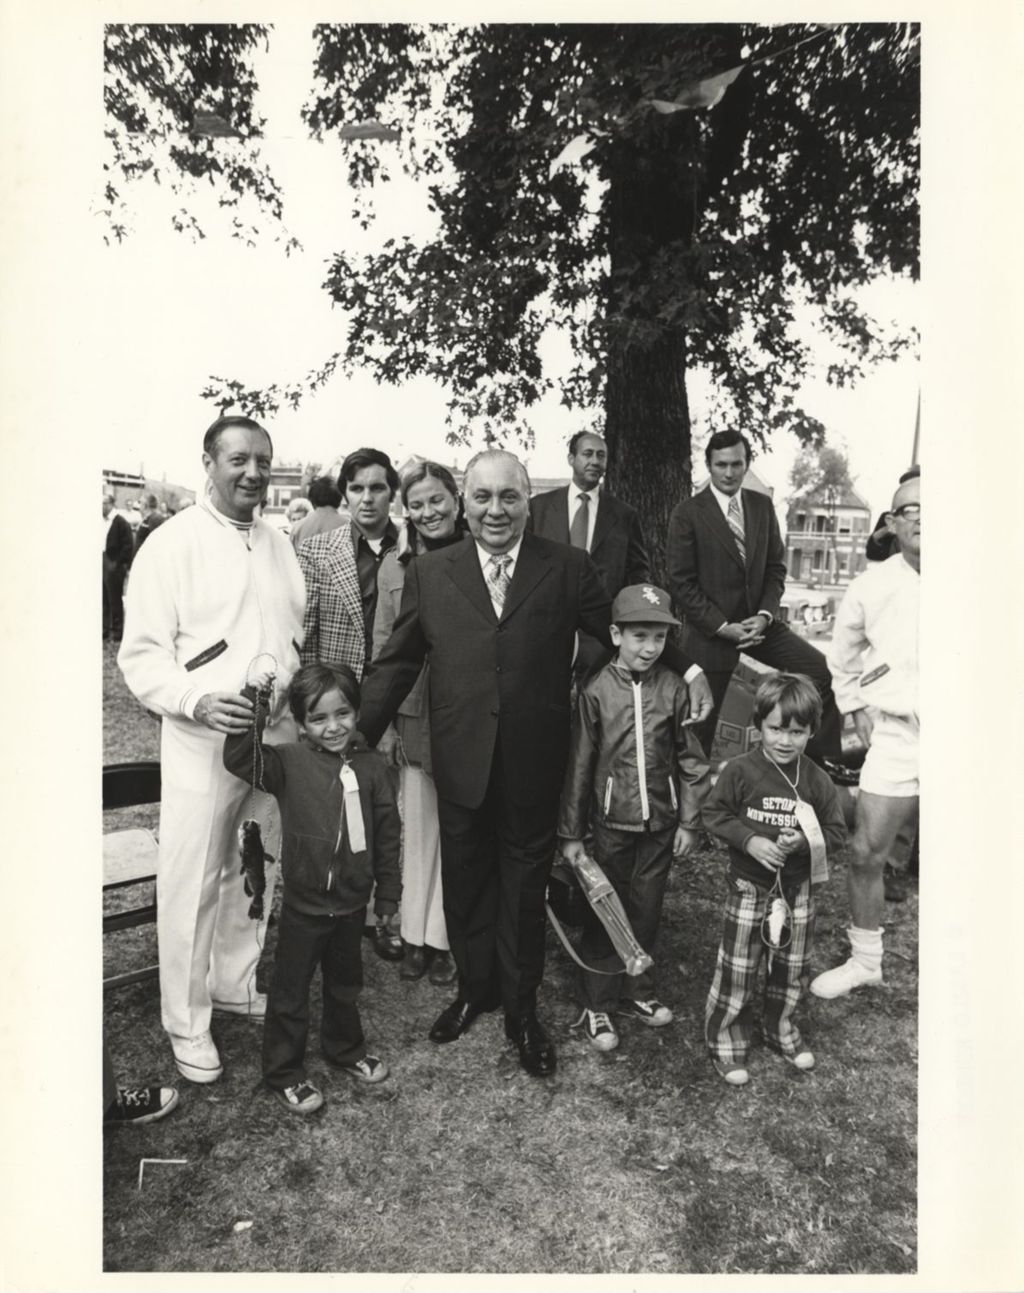 Miniature of Richard J. Daley, Michael Bilandic and others at a Fish Derby